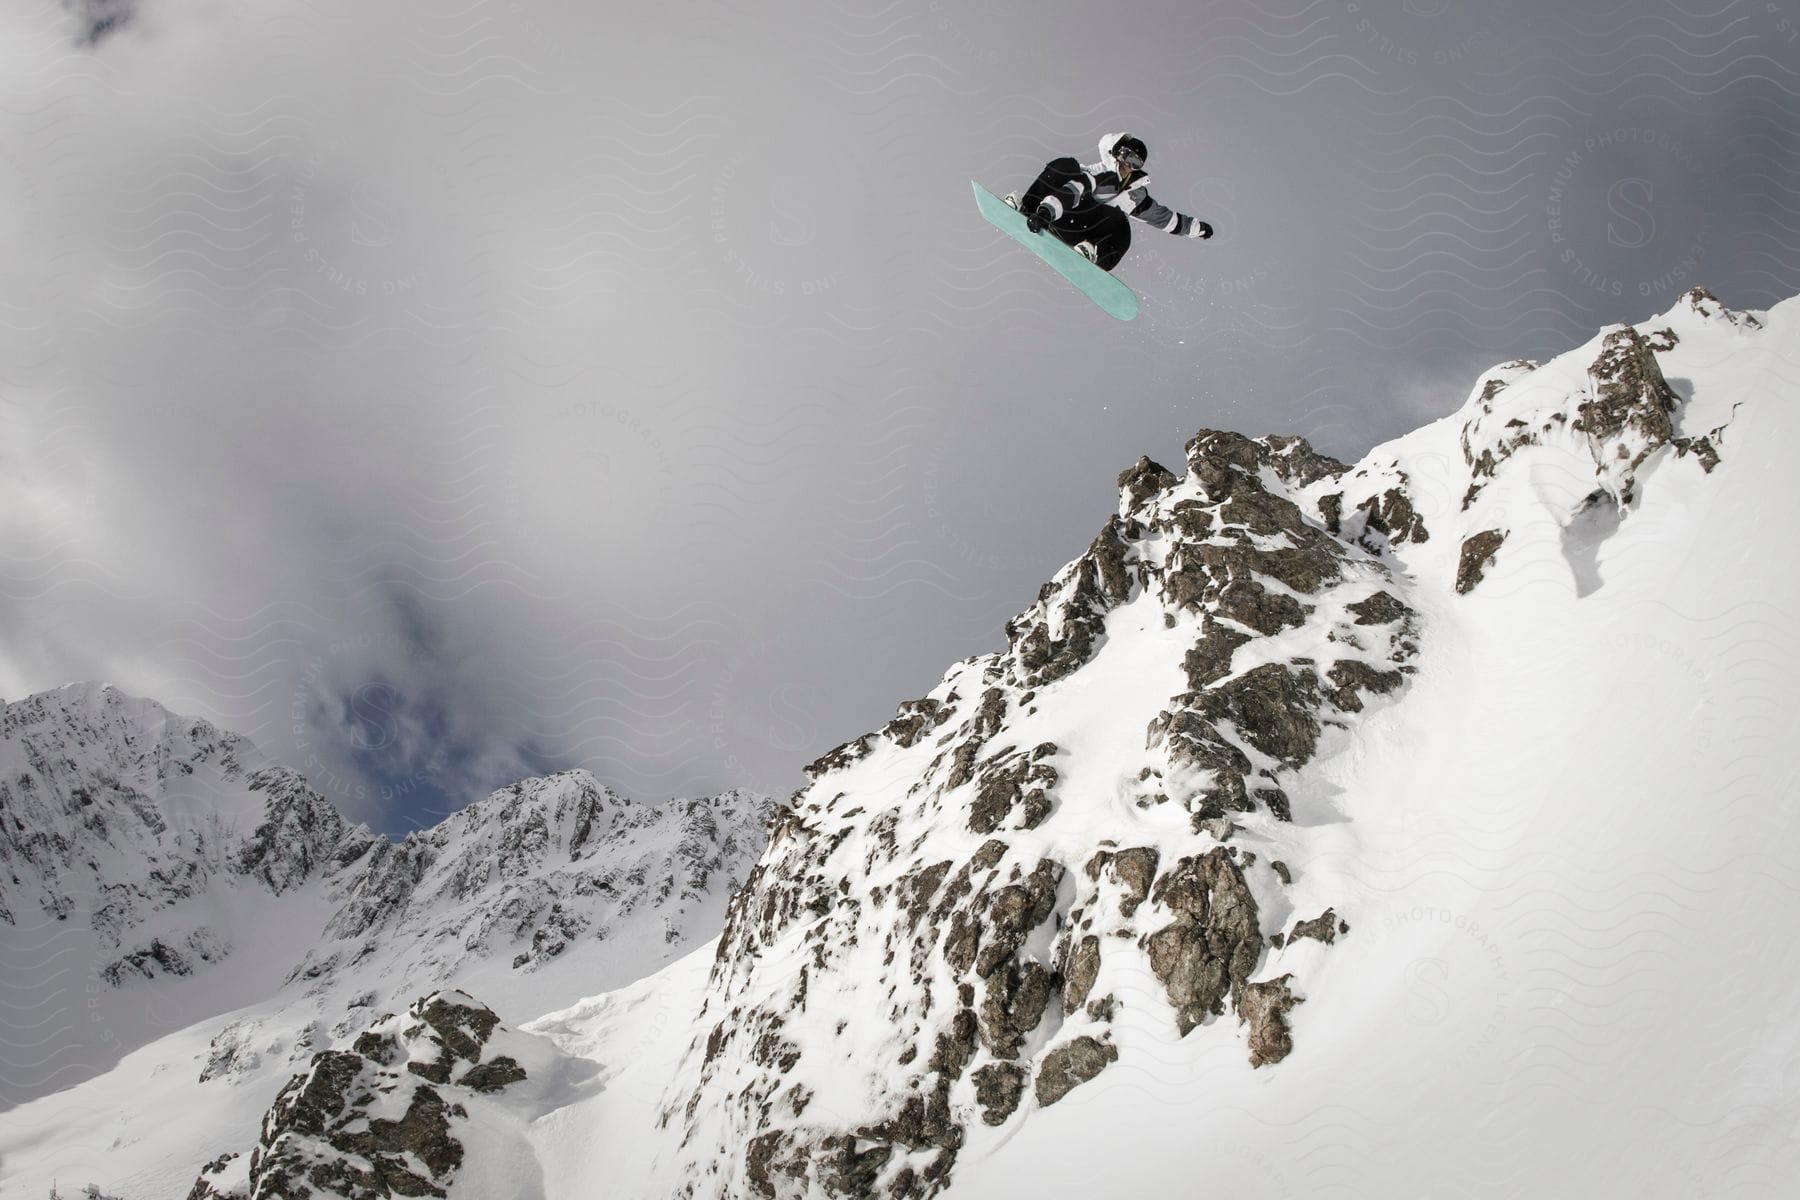 Jumping on a snowboard in the mountains.